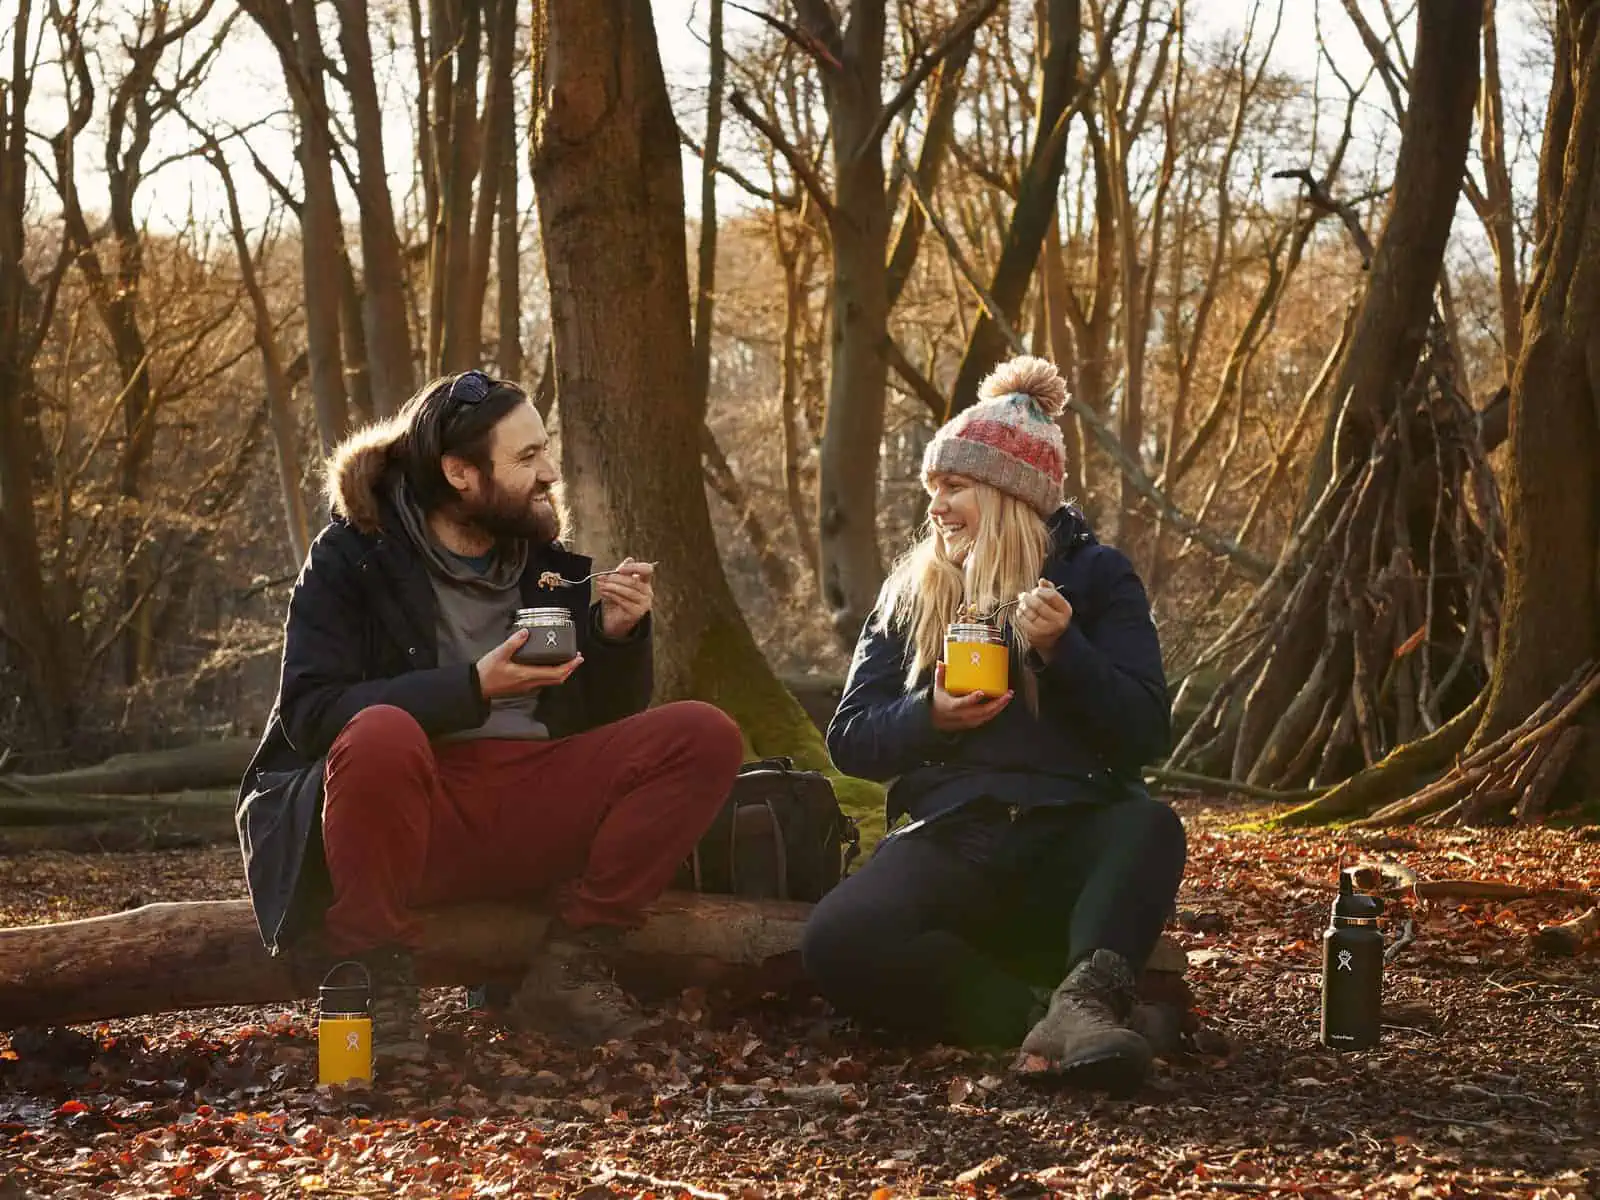 Image Description: A landscape image. Fay and Matt sit in a forest on a log eating from Hydro Flask food containers. To Fay’s left is a black Hydro Flask. To Matt’s right is a yellow Hydro Flask. The ground is golden and covered with leaves. They ar…